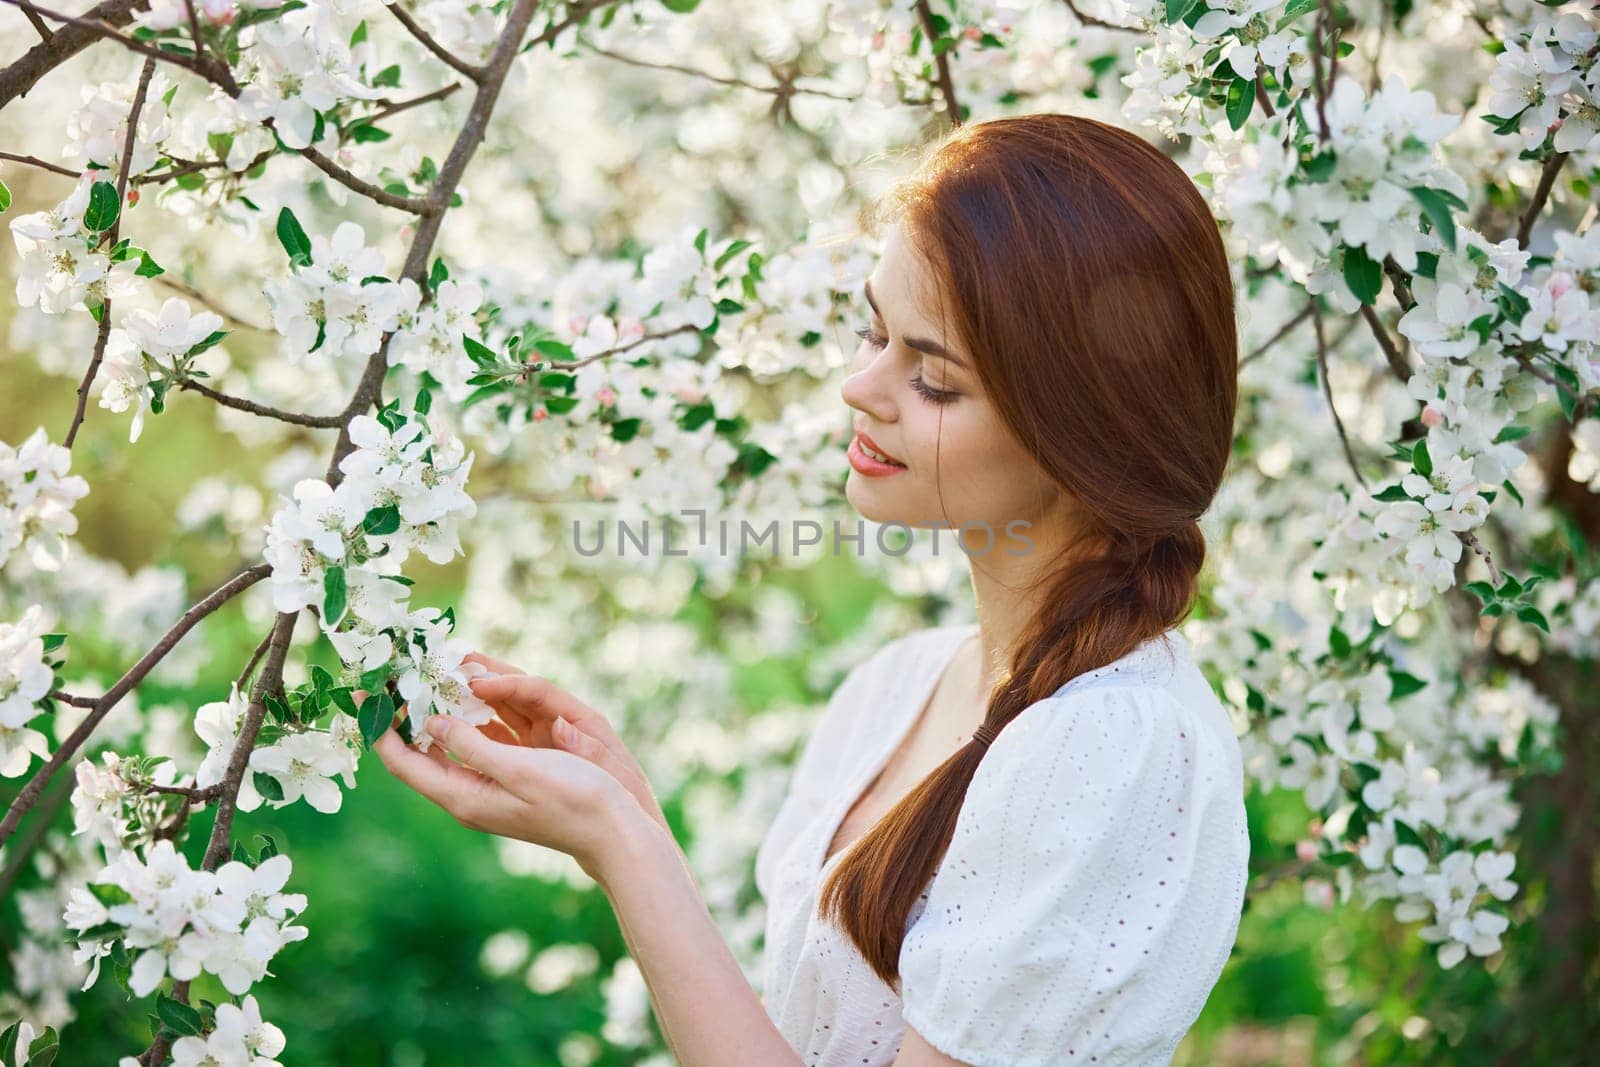 beautiful, cute woman touching flowers on a tree in the garden. High quality photo